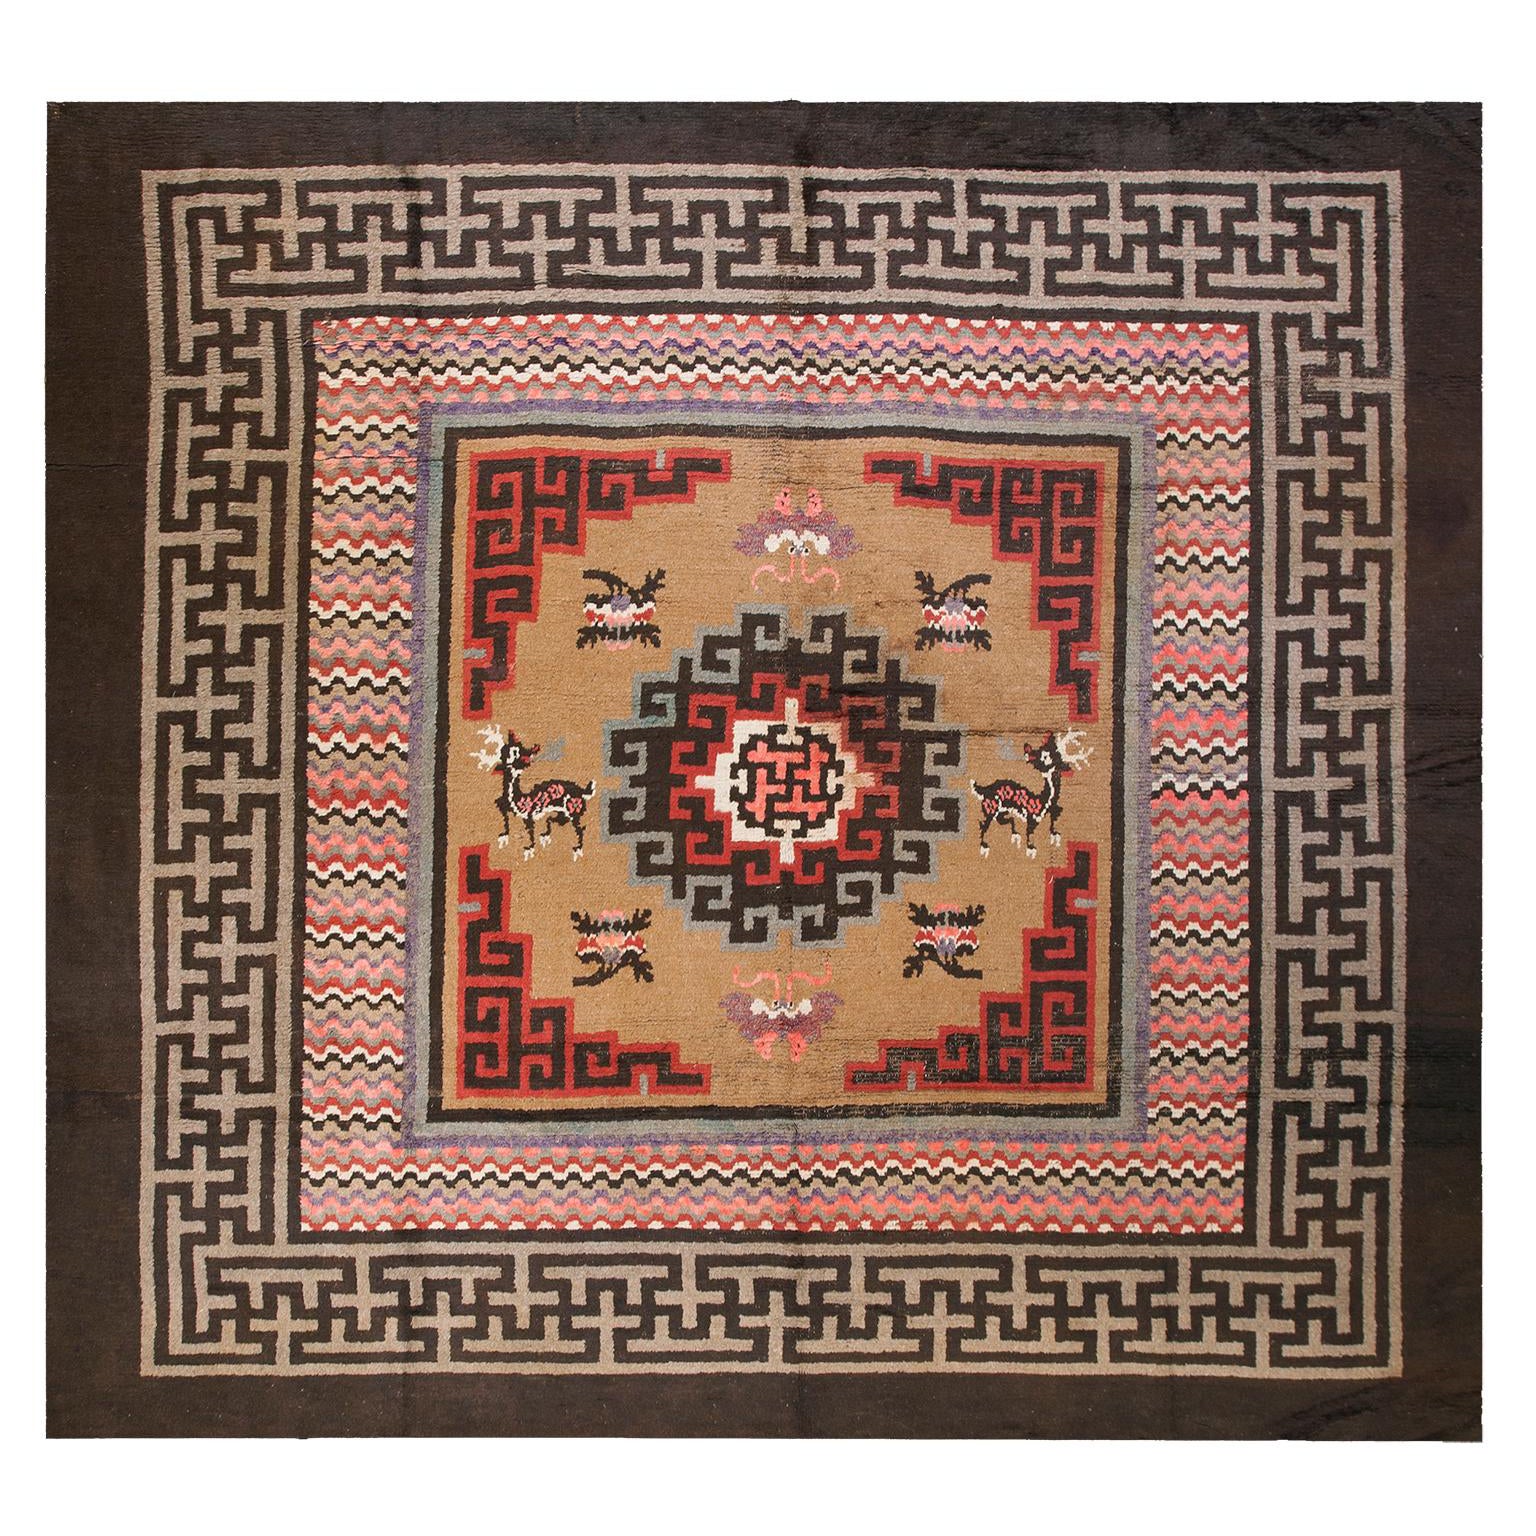 Early 20th Century N. Chinese Mongolian Carpet ( 11'10" x 12'2" - 360 x 370 ) For Sale